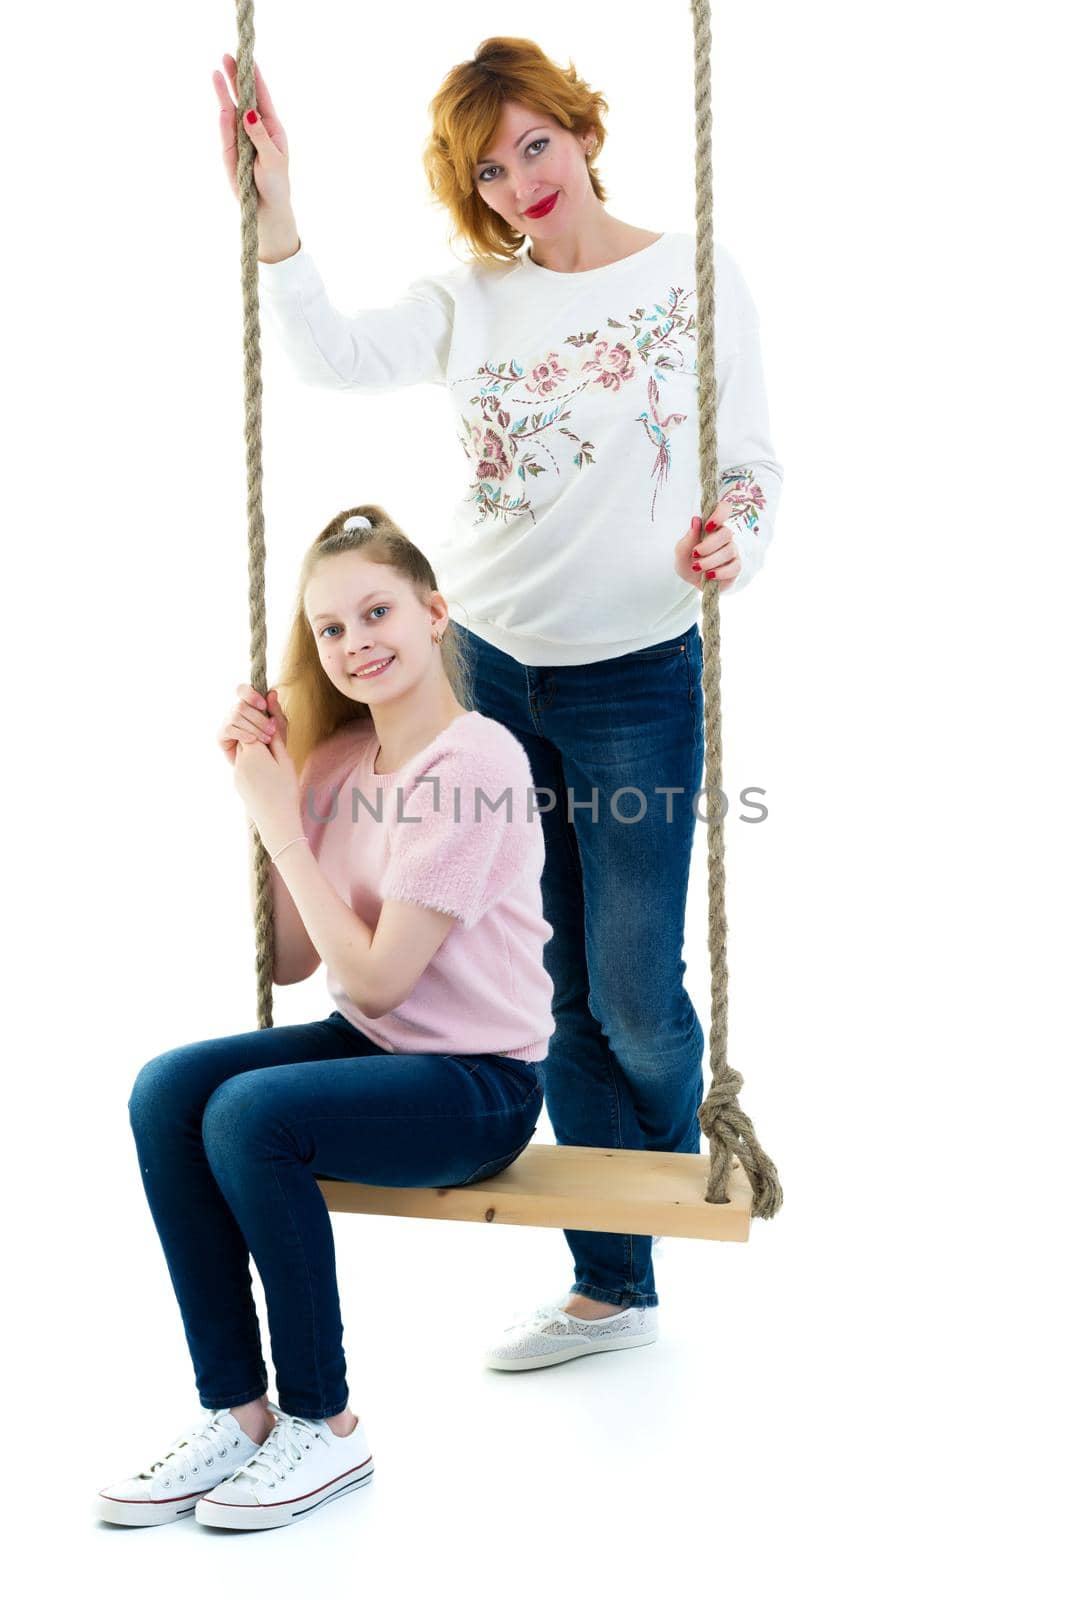 Happy mom and daughter swing on a swing. The concept of family happiness, parenting. Isolated on white background.